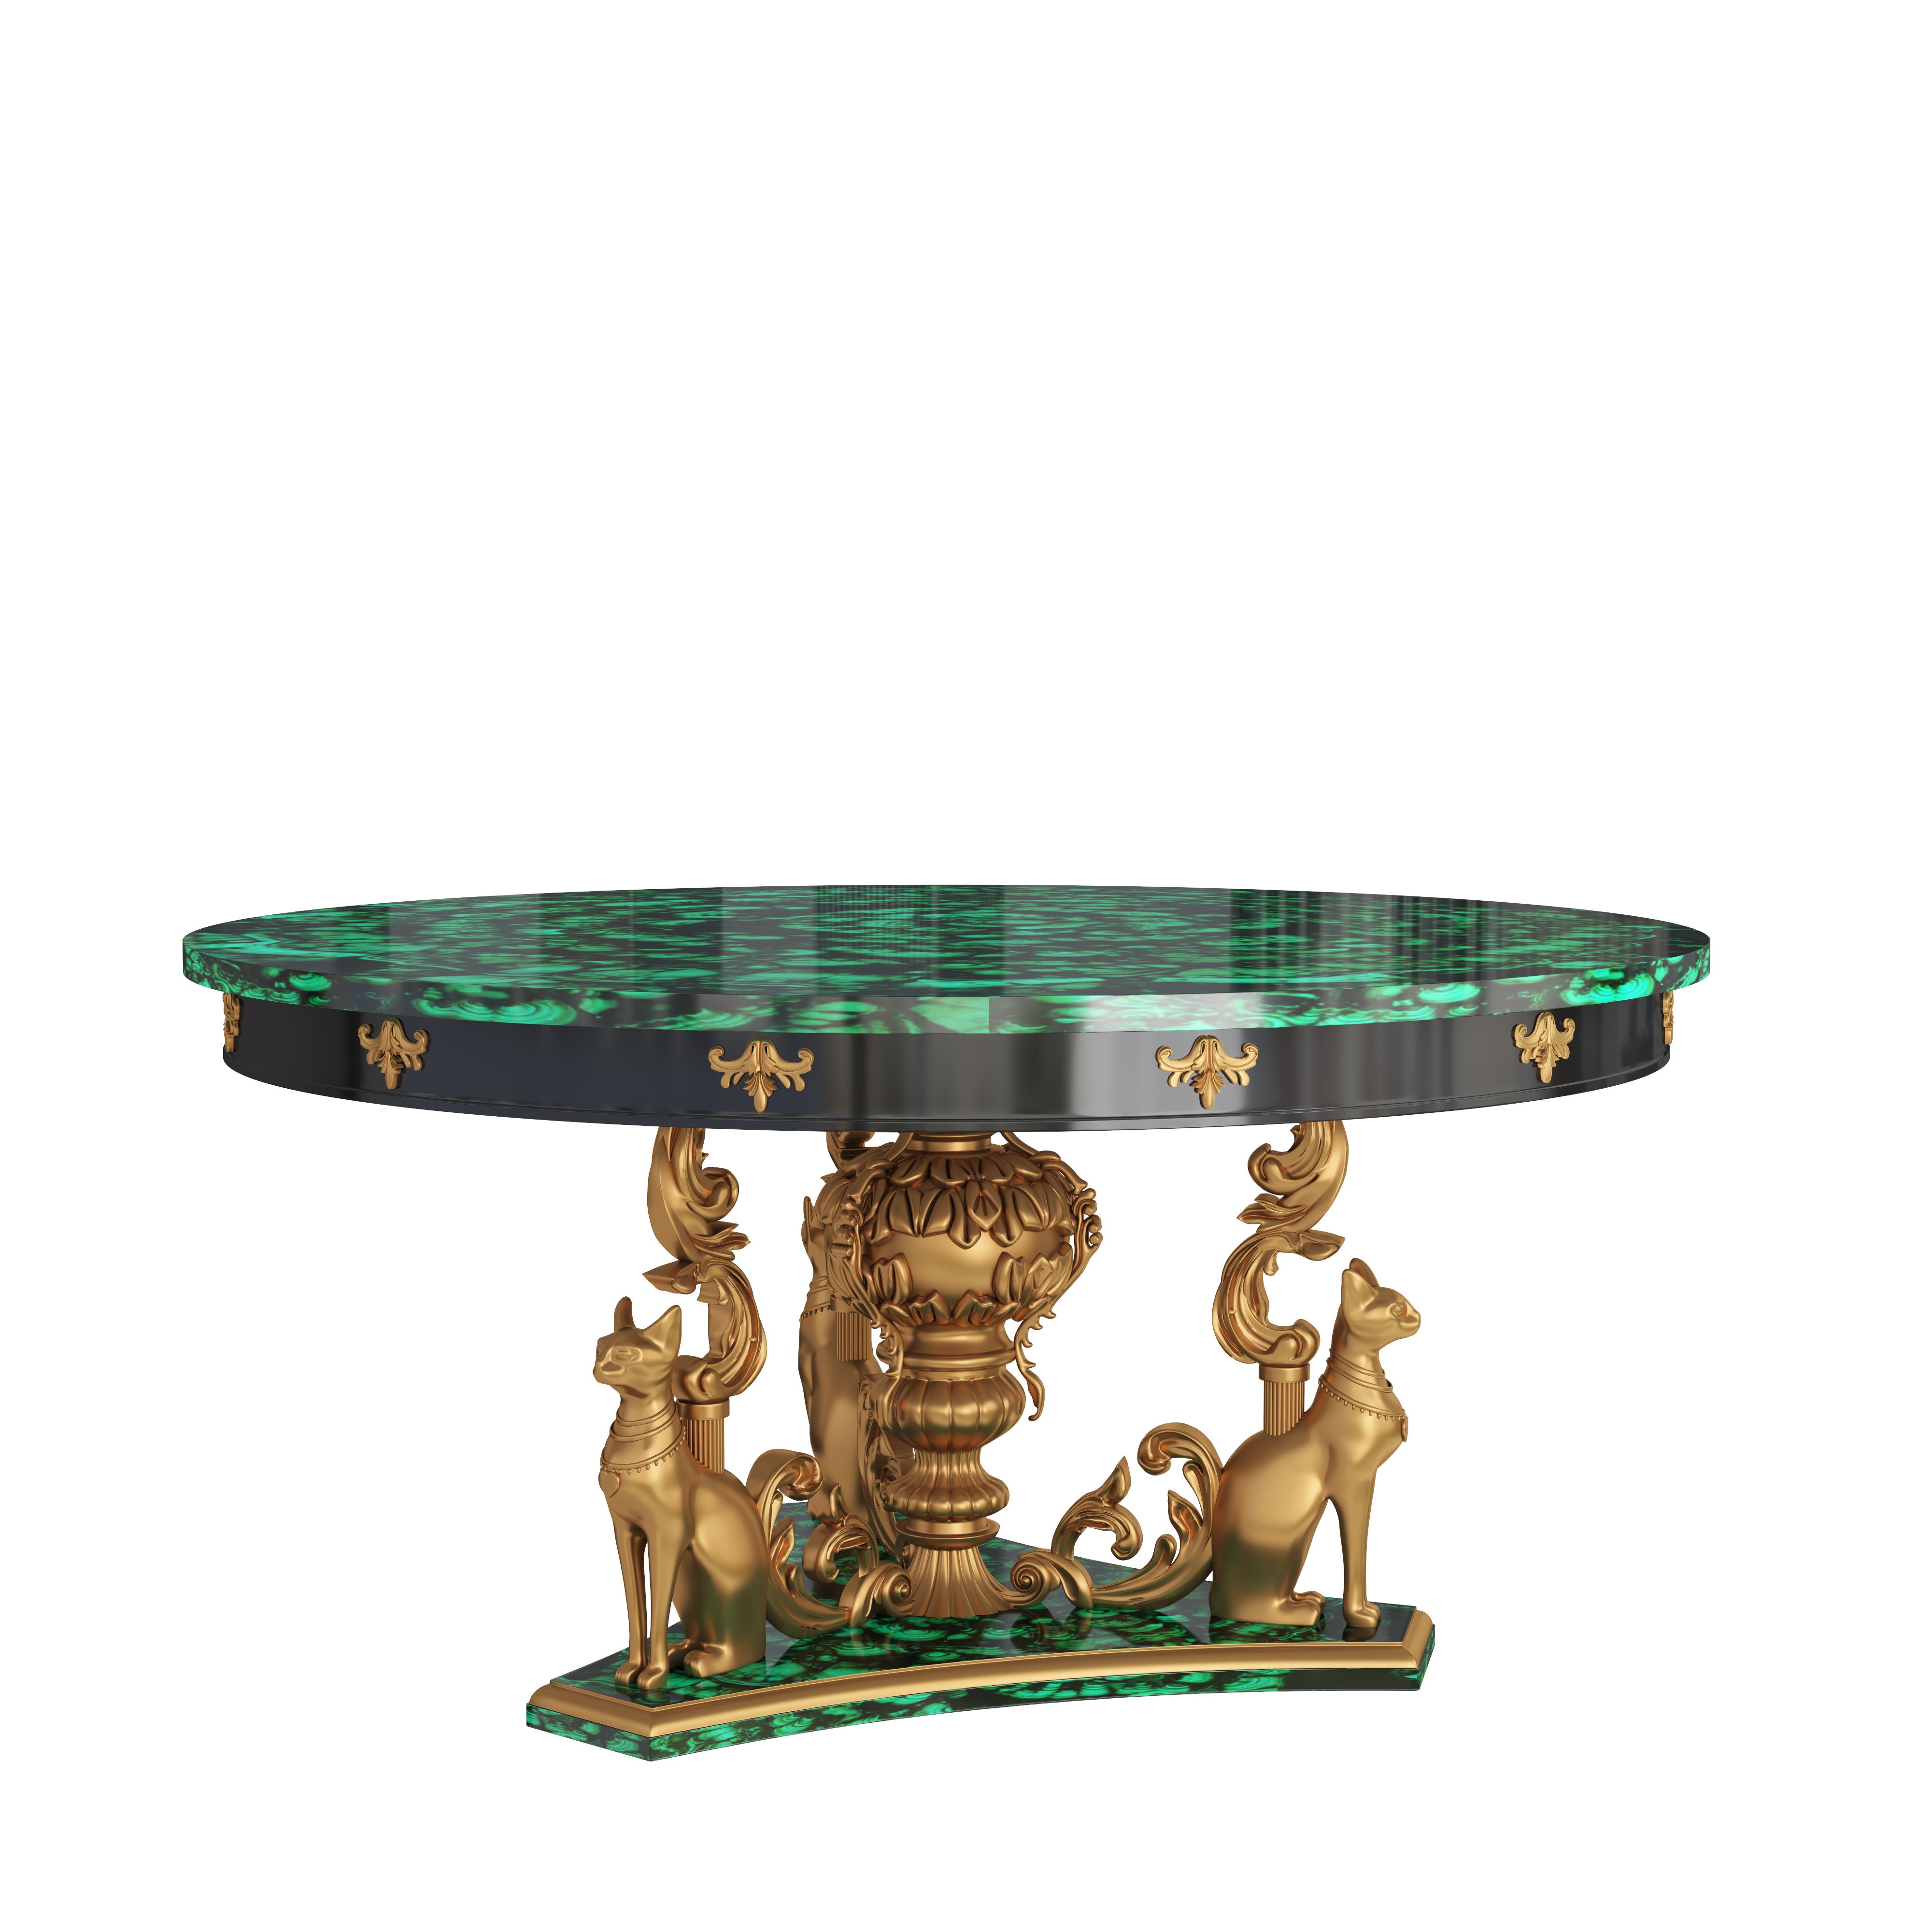 Golden cats dining table